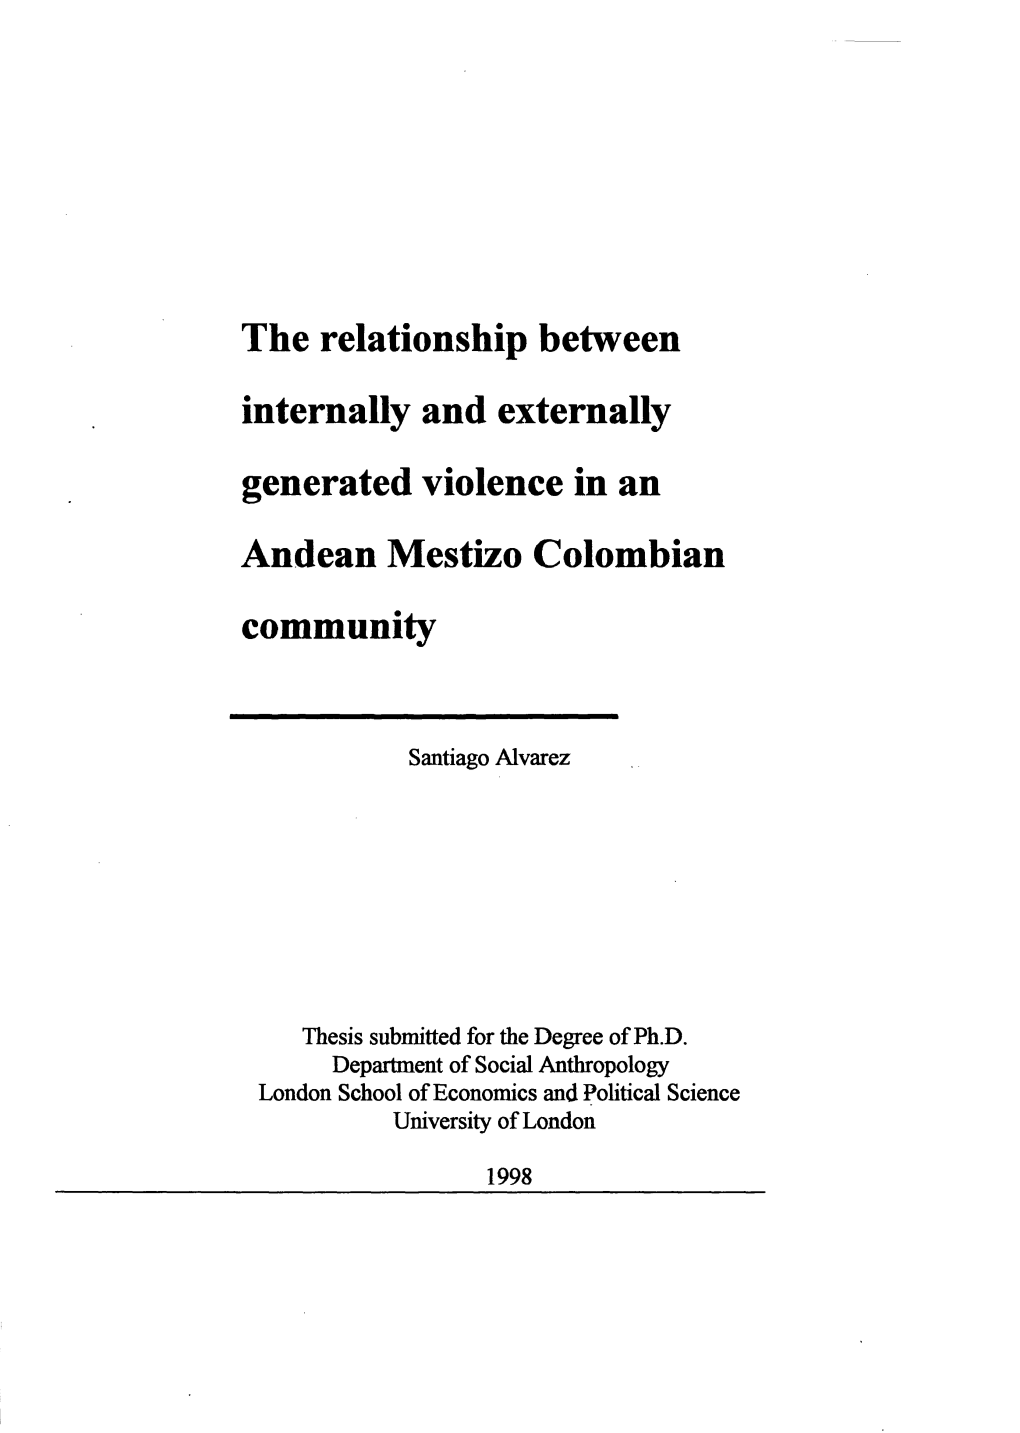 The Relationship Between Internally and Externally Generated Violence in an Andean Mestizo Colombian Community